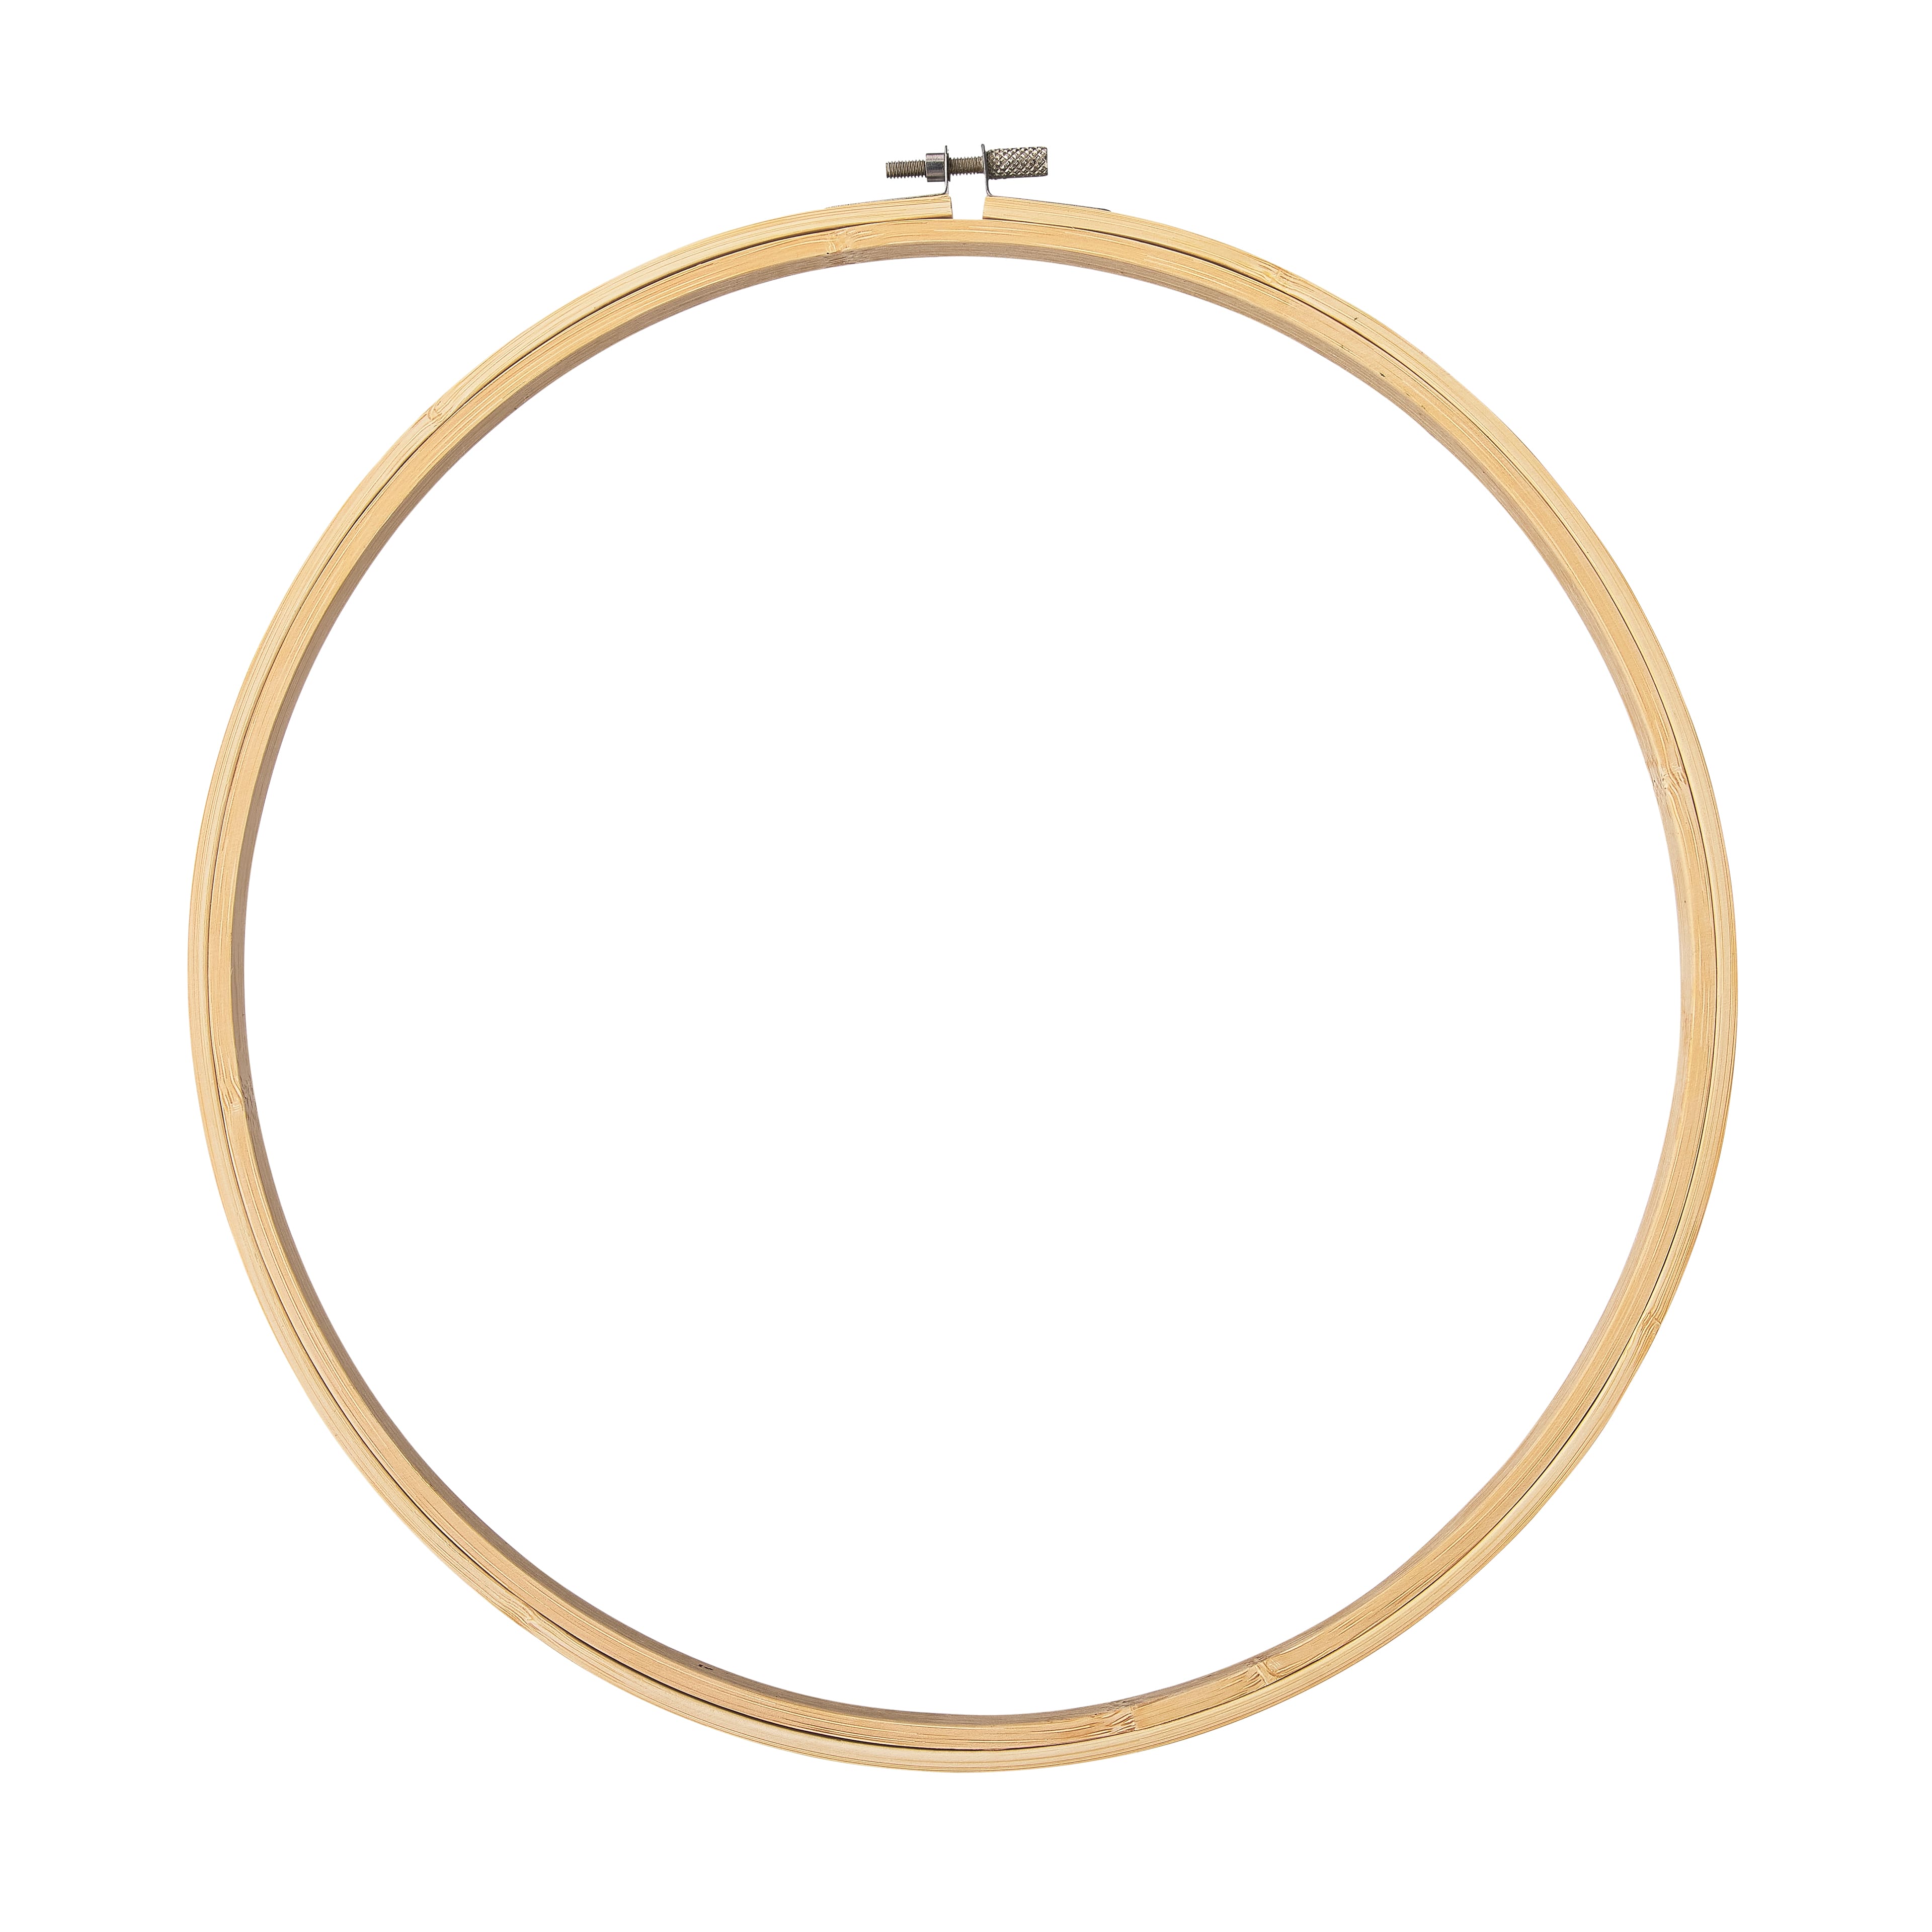 Set Of 12 6 Inch Bamboo Circle Cross Stitch Hardwood Hoops For Art Crafts  And Sewing From Imeav, $31.02